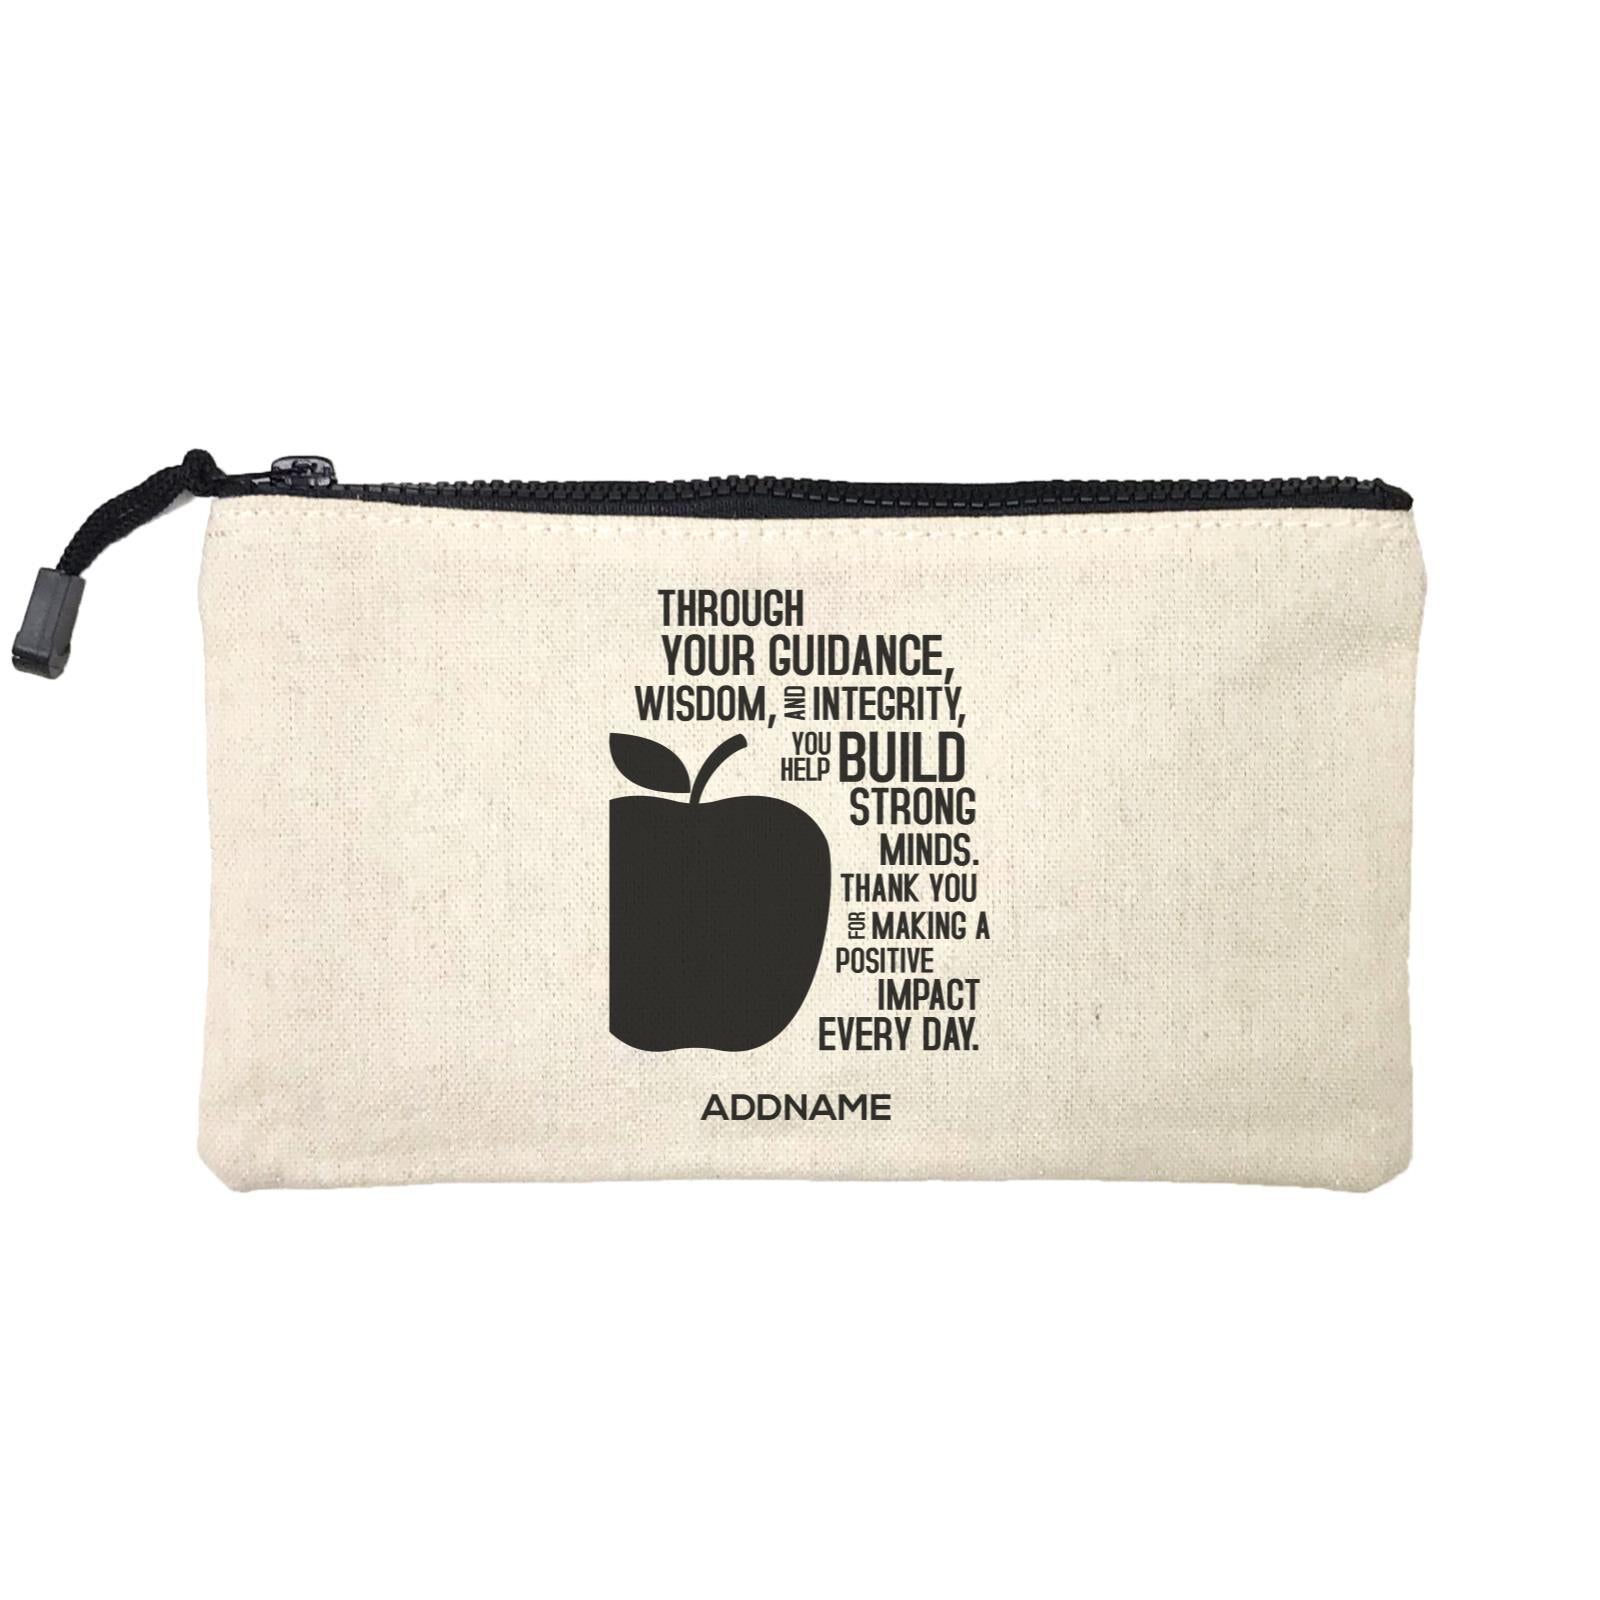 Super Teachers Thank You For Making A Positive Impact Everyday Addname Mini Accessories Stationery Pouch